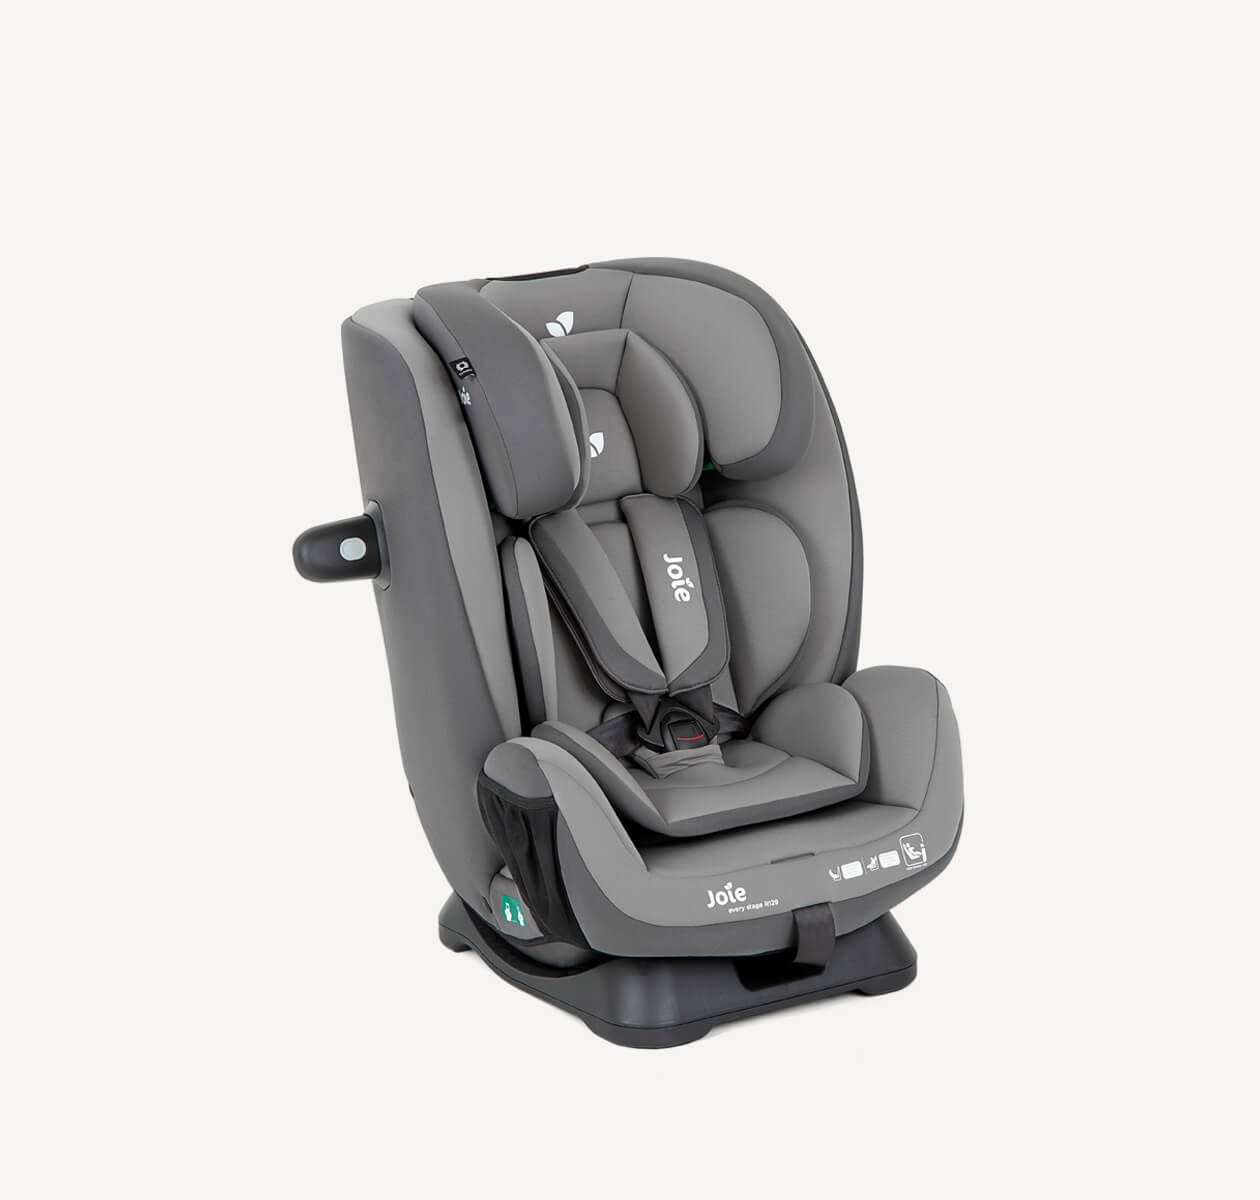  Joie Every Stage R129 car seat with 5-point harness and infant insert in two-tone gray, at an angle facing to the right.